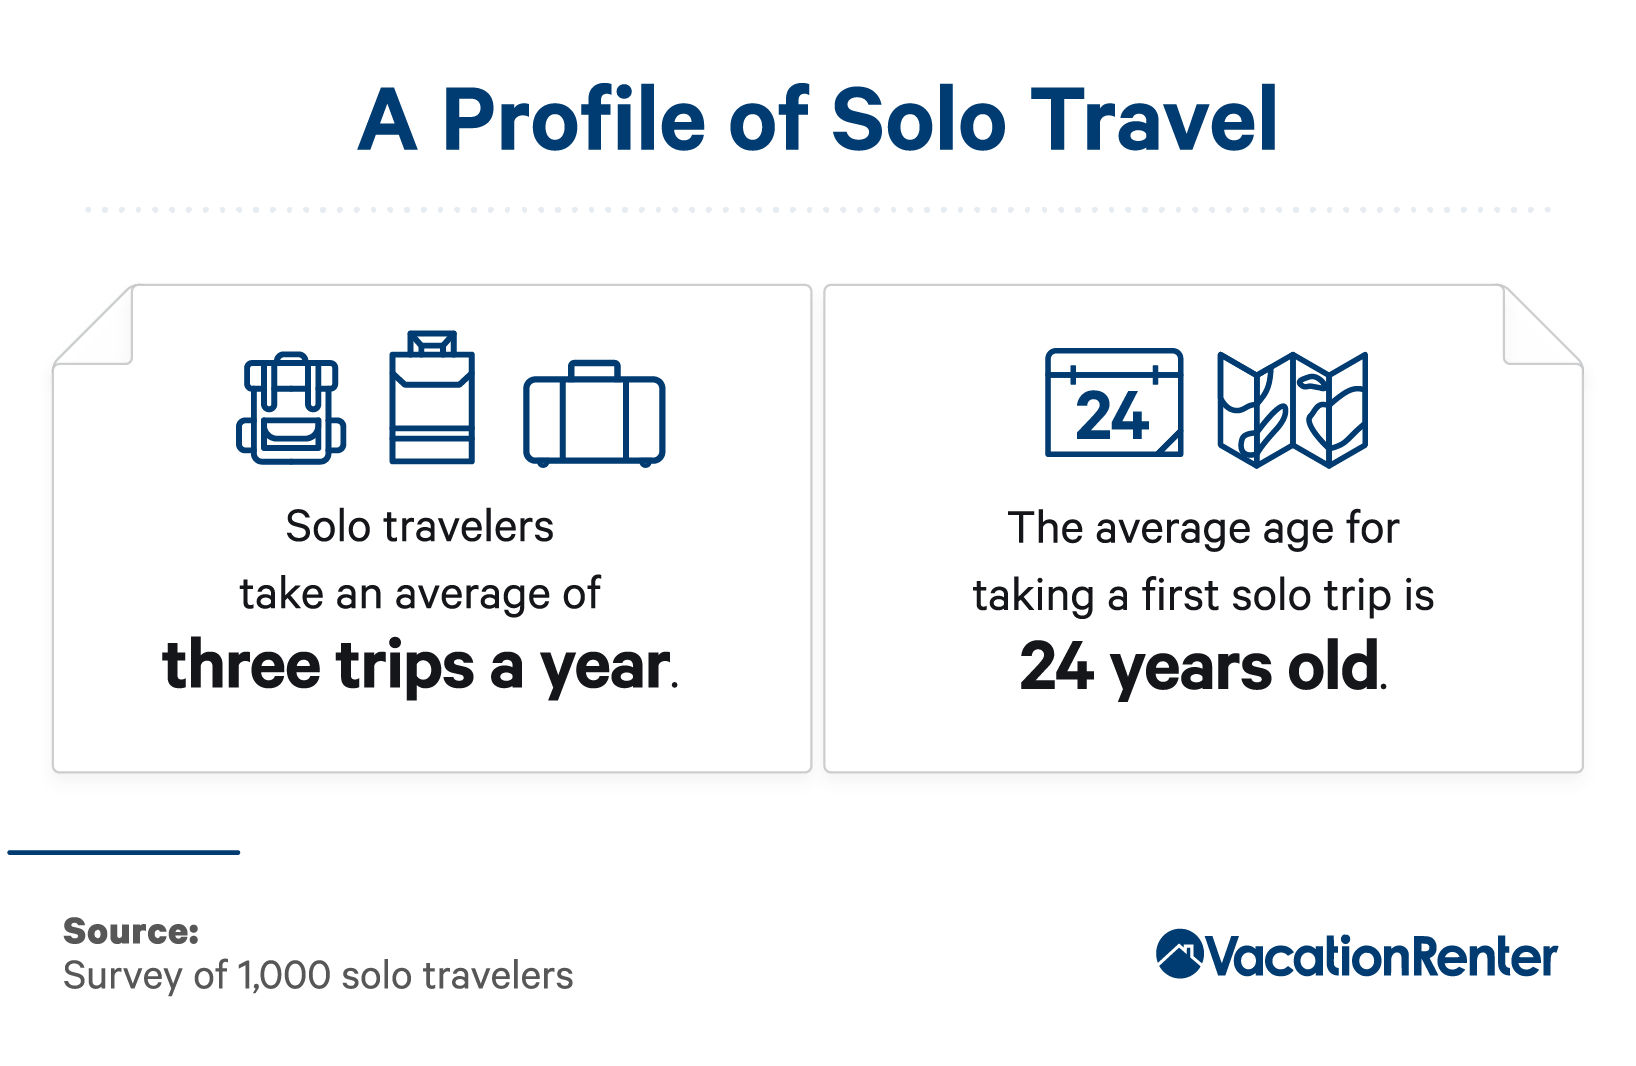 Average number of solo trips and average age of first solo trip